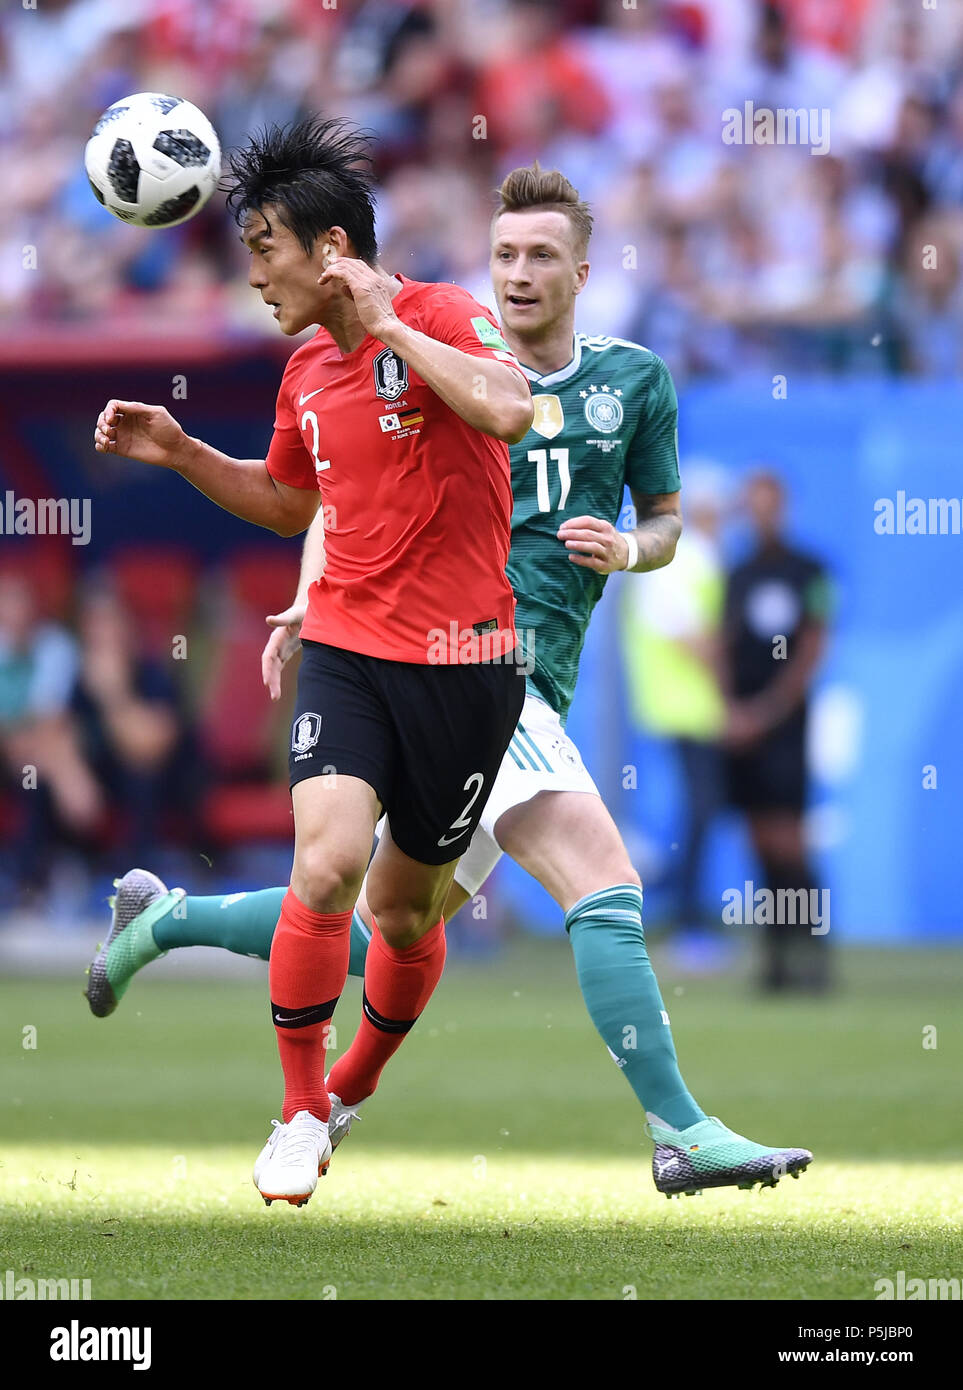 Kazan, Russia. 27th June, 2018. Marco Reus (R) of Germany vies with Lee Yong of South Korea during the 2018 FIFA World Cup Group F match between Germany and South Korea in Kazan, Russia, June 27, 2018. Credit: Chen Yichen/Xinhua/Alamy Live News Stock Photo